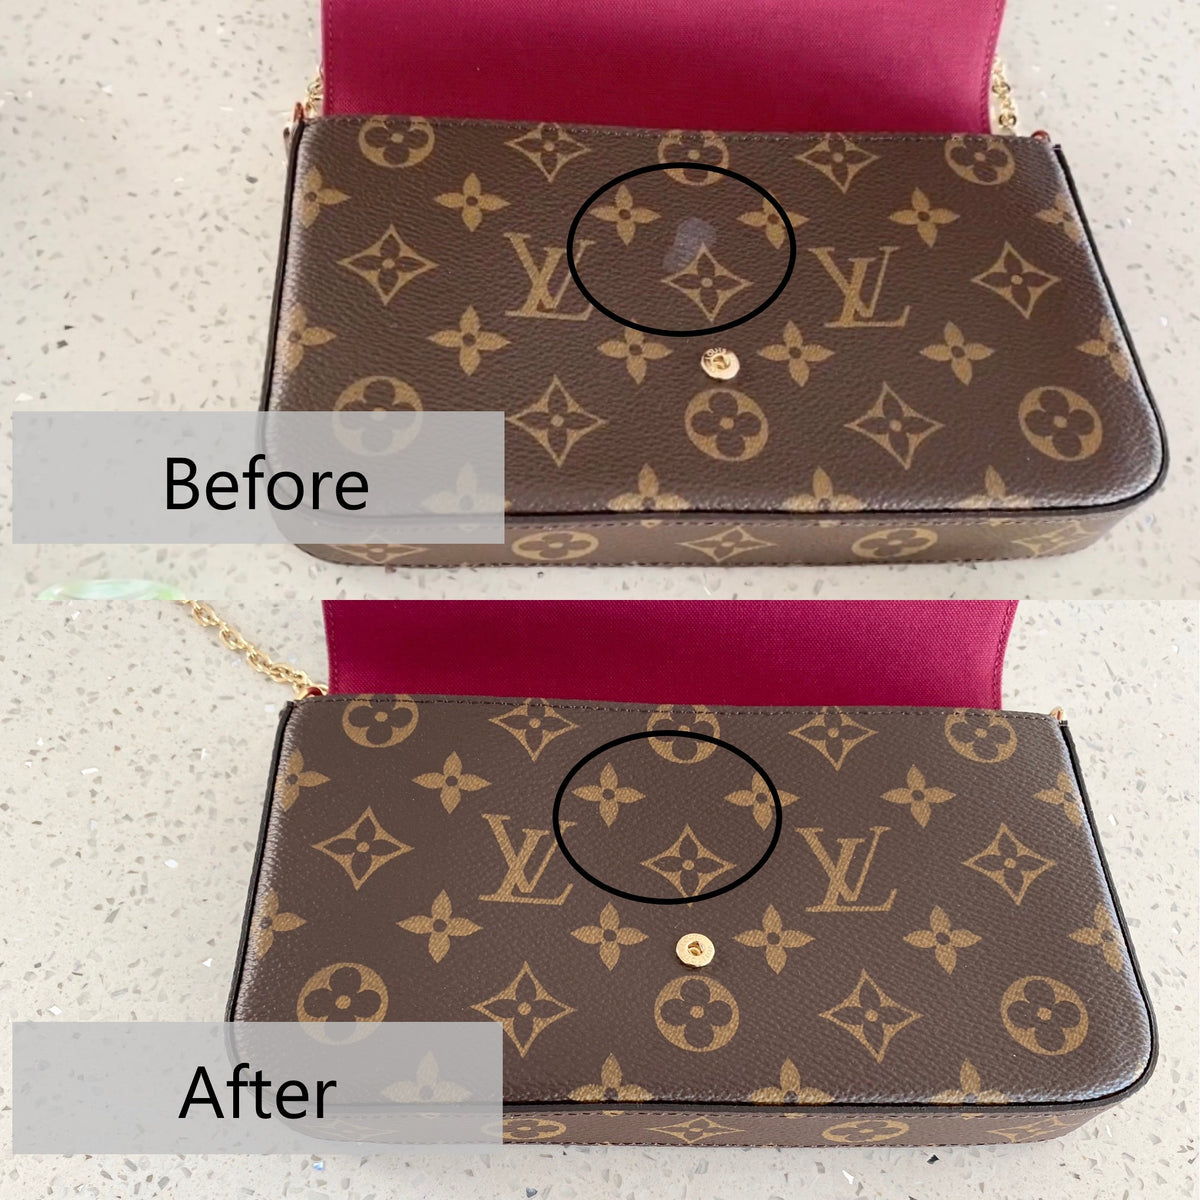 VLOG* Cleaning my Monogram Louis Vuitton Handbags & How You Can Too! 